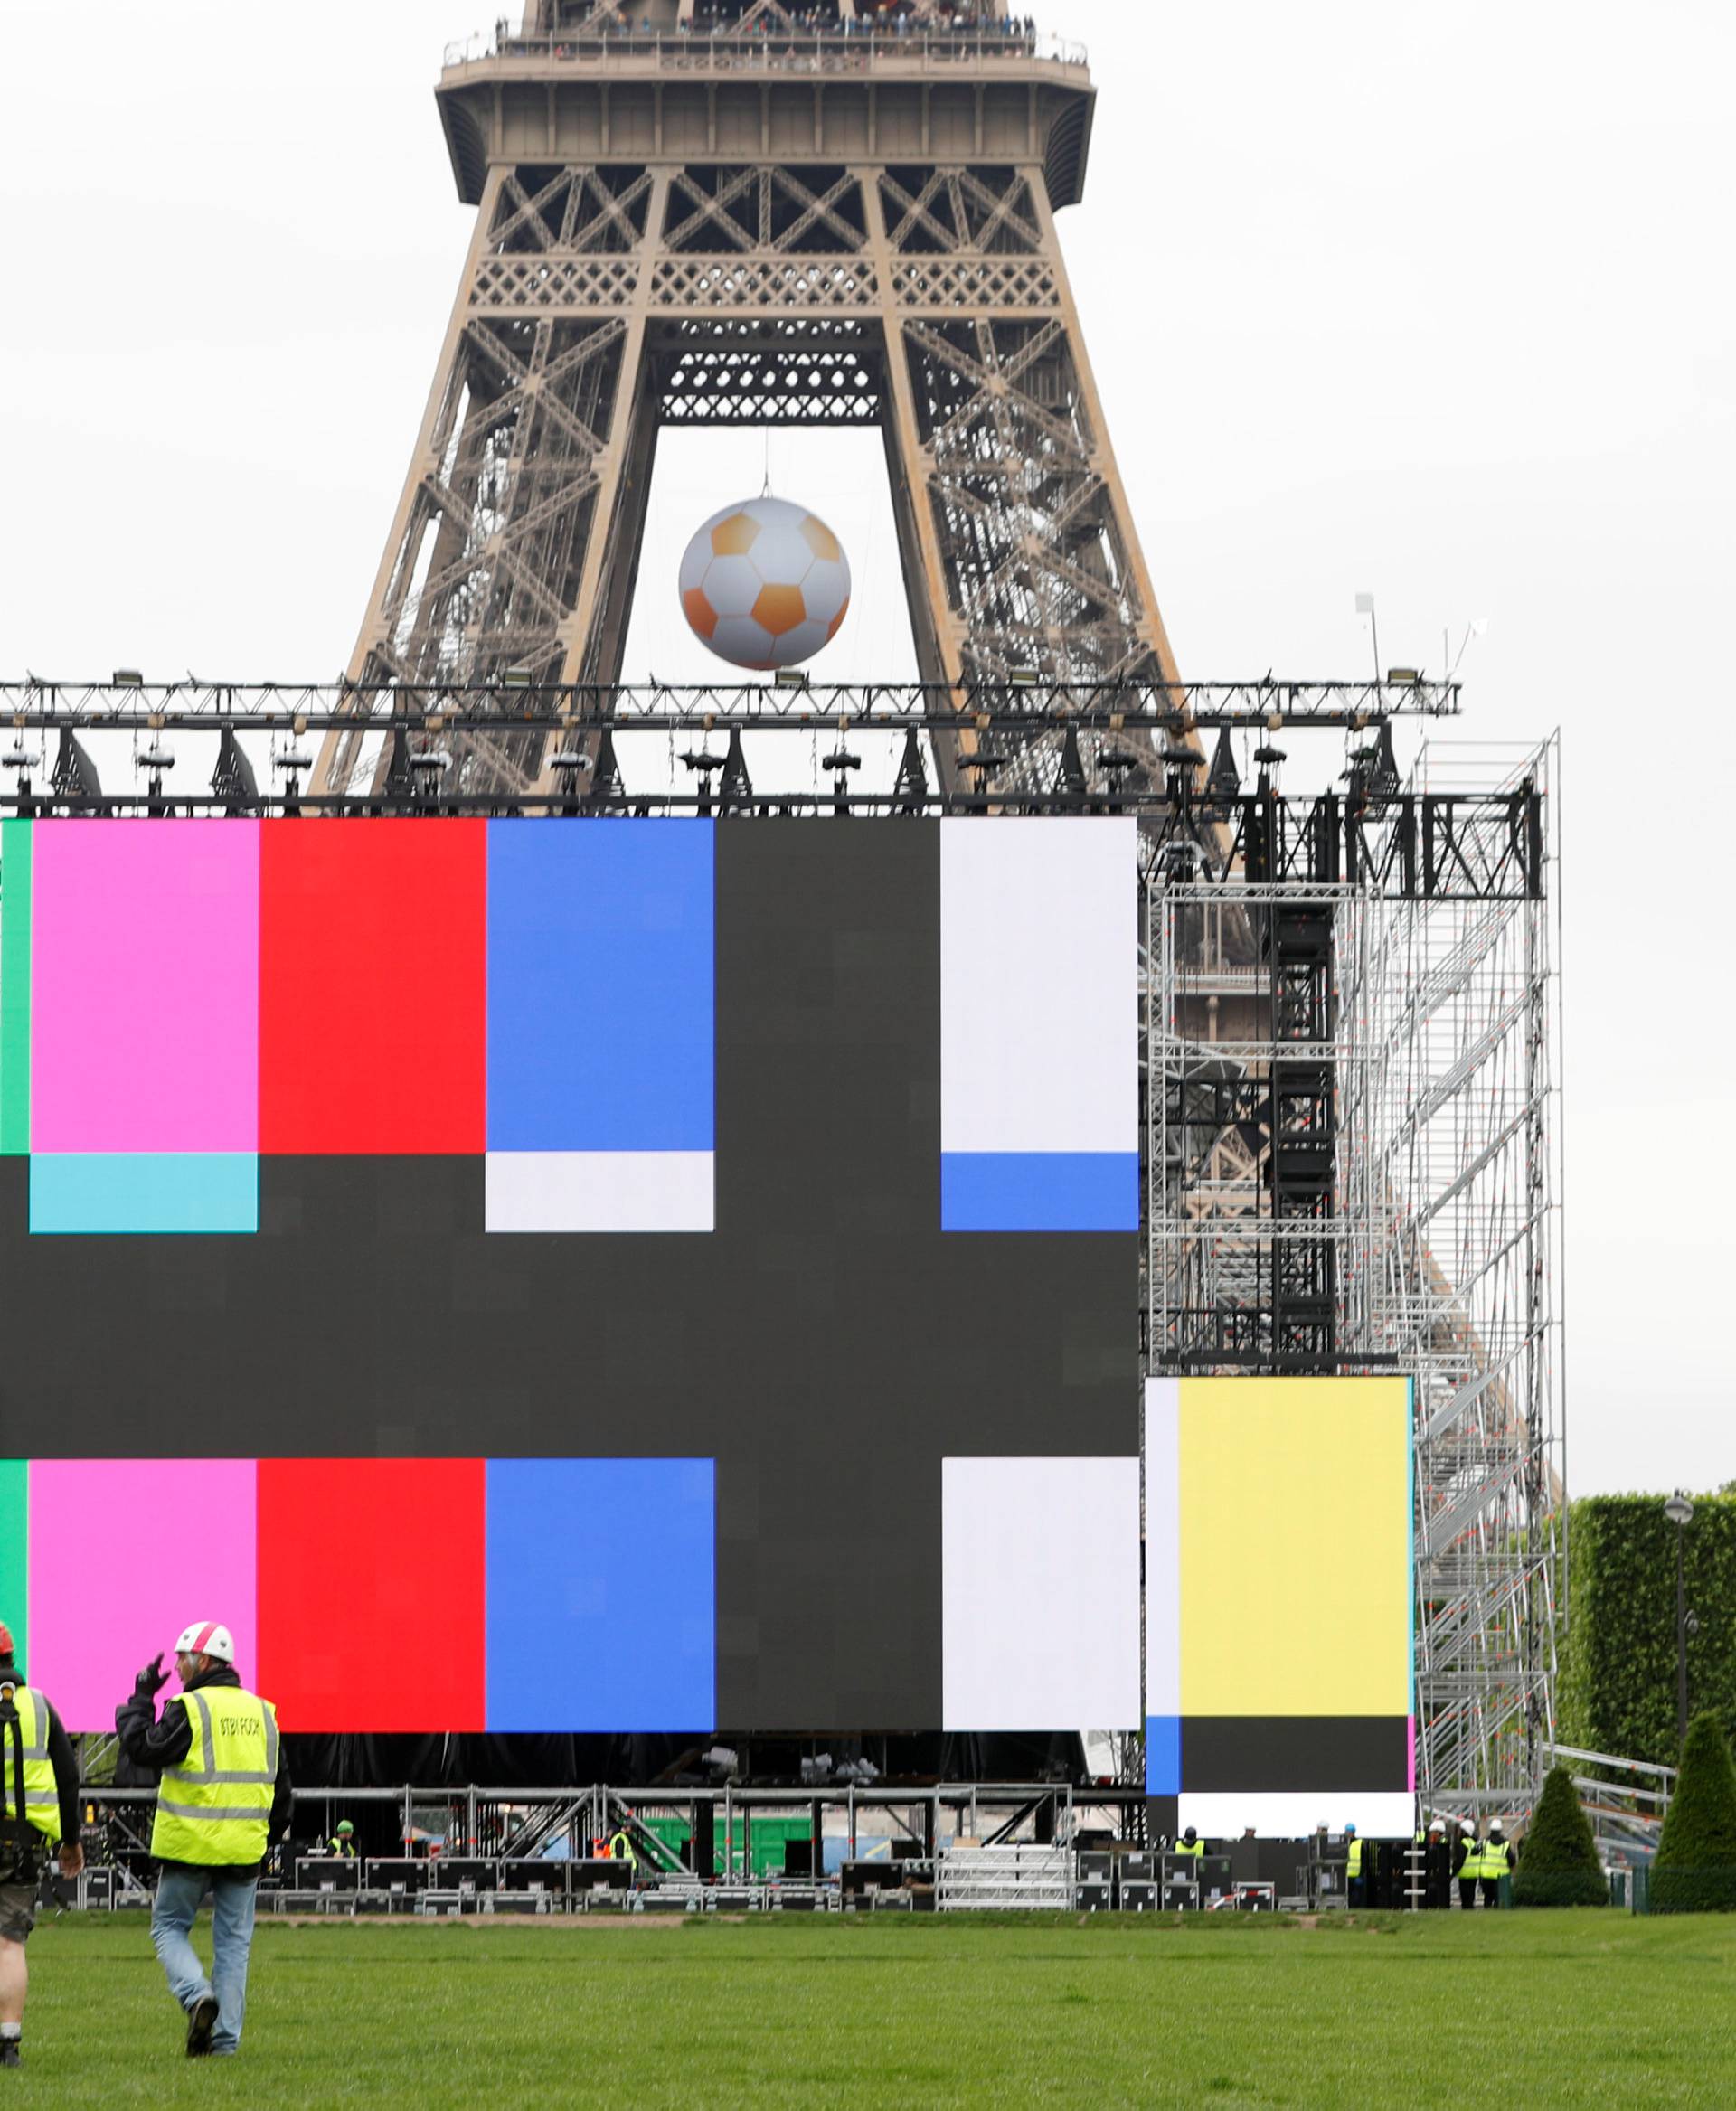 Workers install a giant screen at a fan zone near the Eiffel Tower before the start of the UEFA 2016 European Championship in Paris